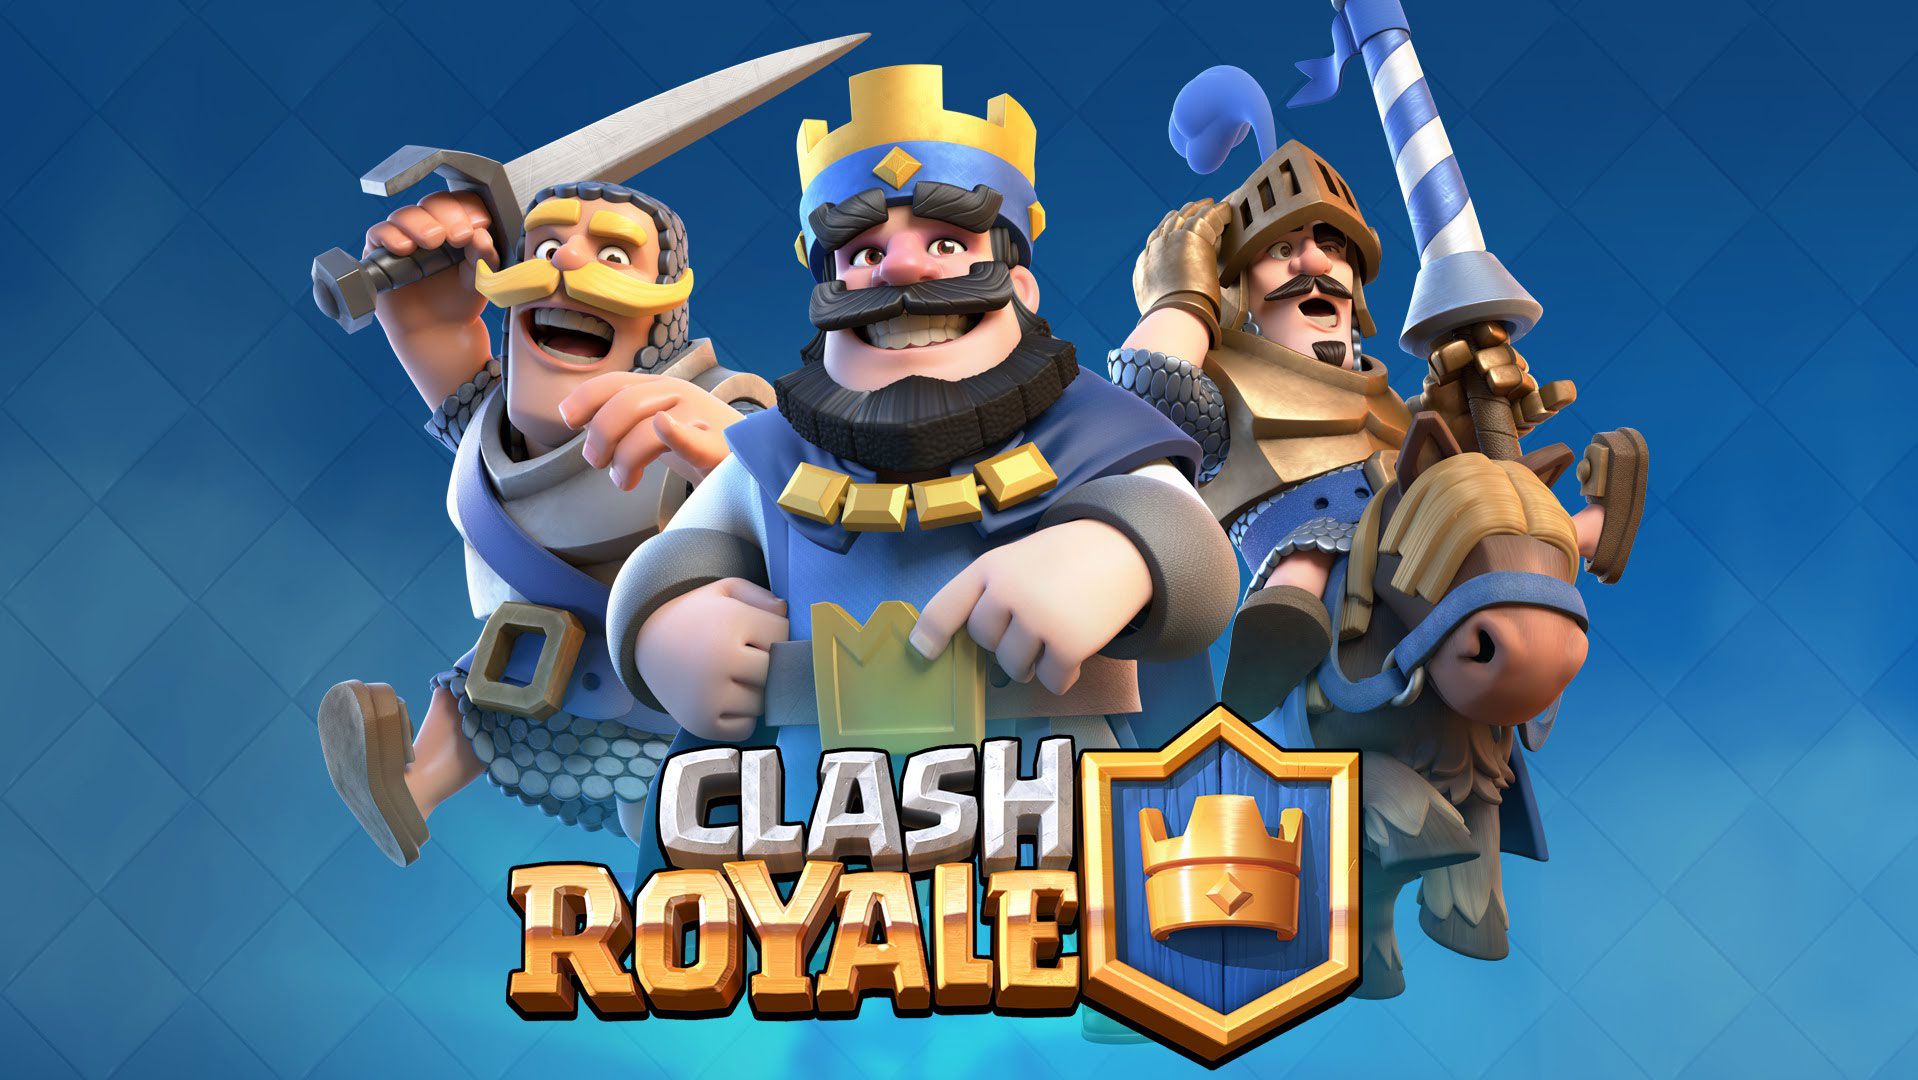 Clash Royale review: my first freemium game – Reader's Feature ...